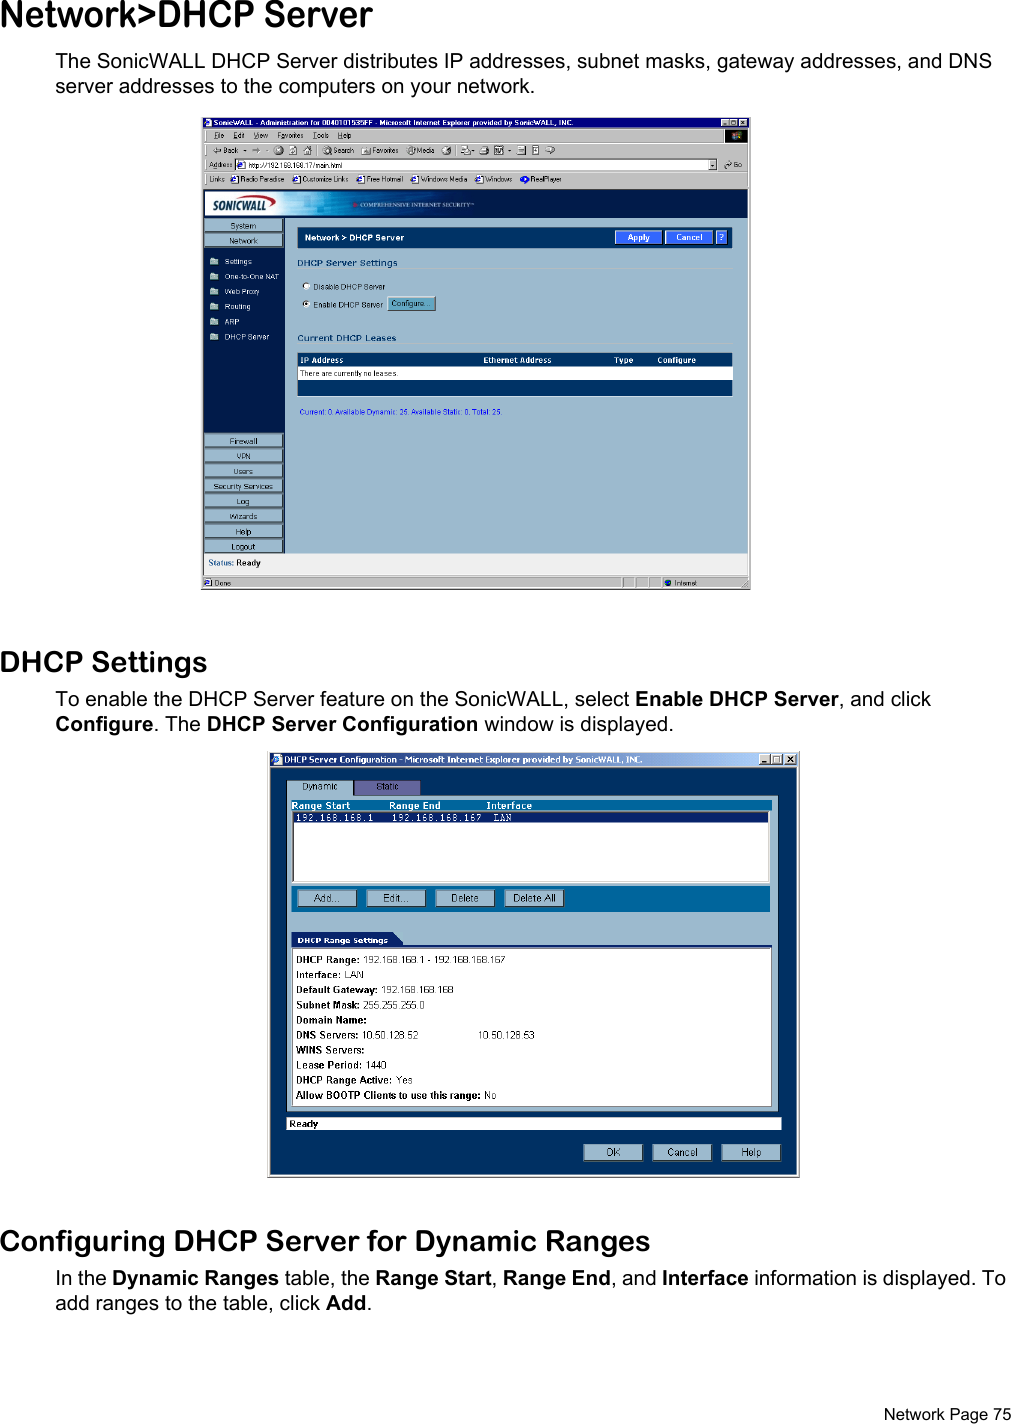  Network Page 75Network&gt;DHCP ServerThe SonicWALL DHCP Server distributes IP addresses, subnet masks, gateway addresses, and DNS server addresses to the computers on your network. DHCP SettingsTo enable the DHCP Server feature on the SonicWALL, select Enable DHCP Server, and click Configure. The DHCP Server Configuration window is displayed. Configuring DHCP Server for Dynamic RangesIn the Dynamic Ranges table, the Range Start, Range End, and Interface information is displayed. To add ranges to the table, click Add. 